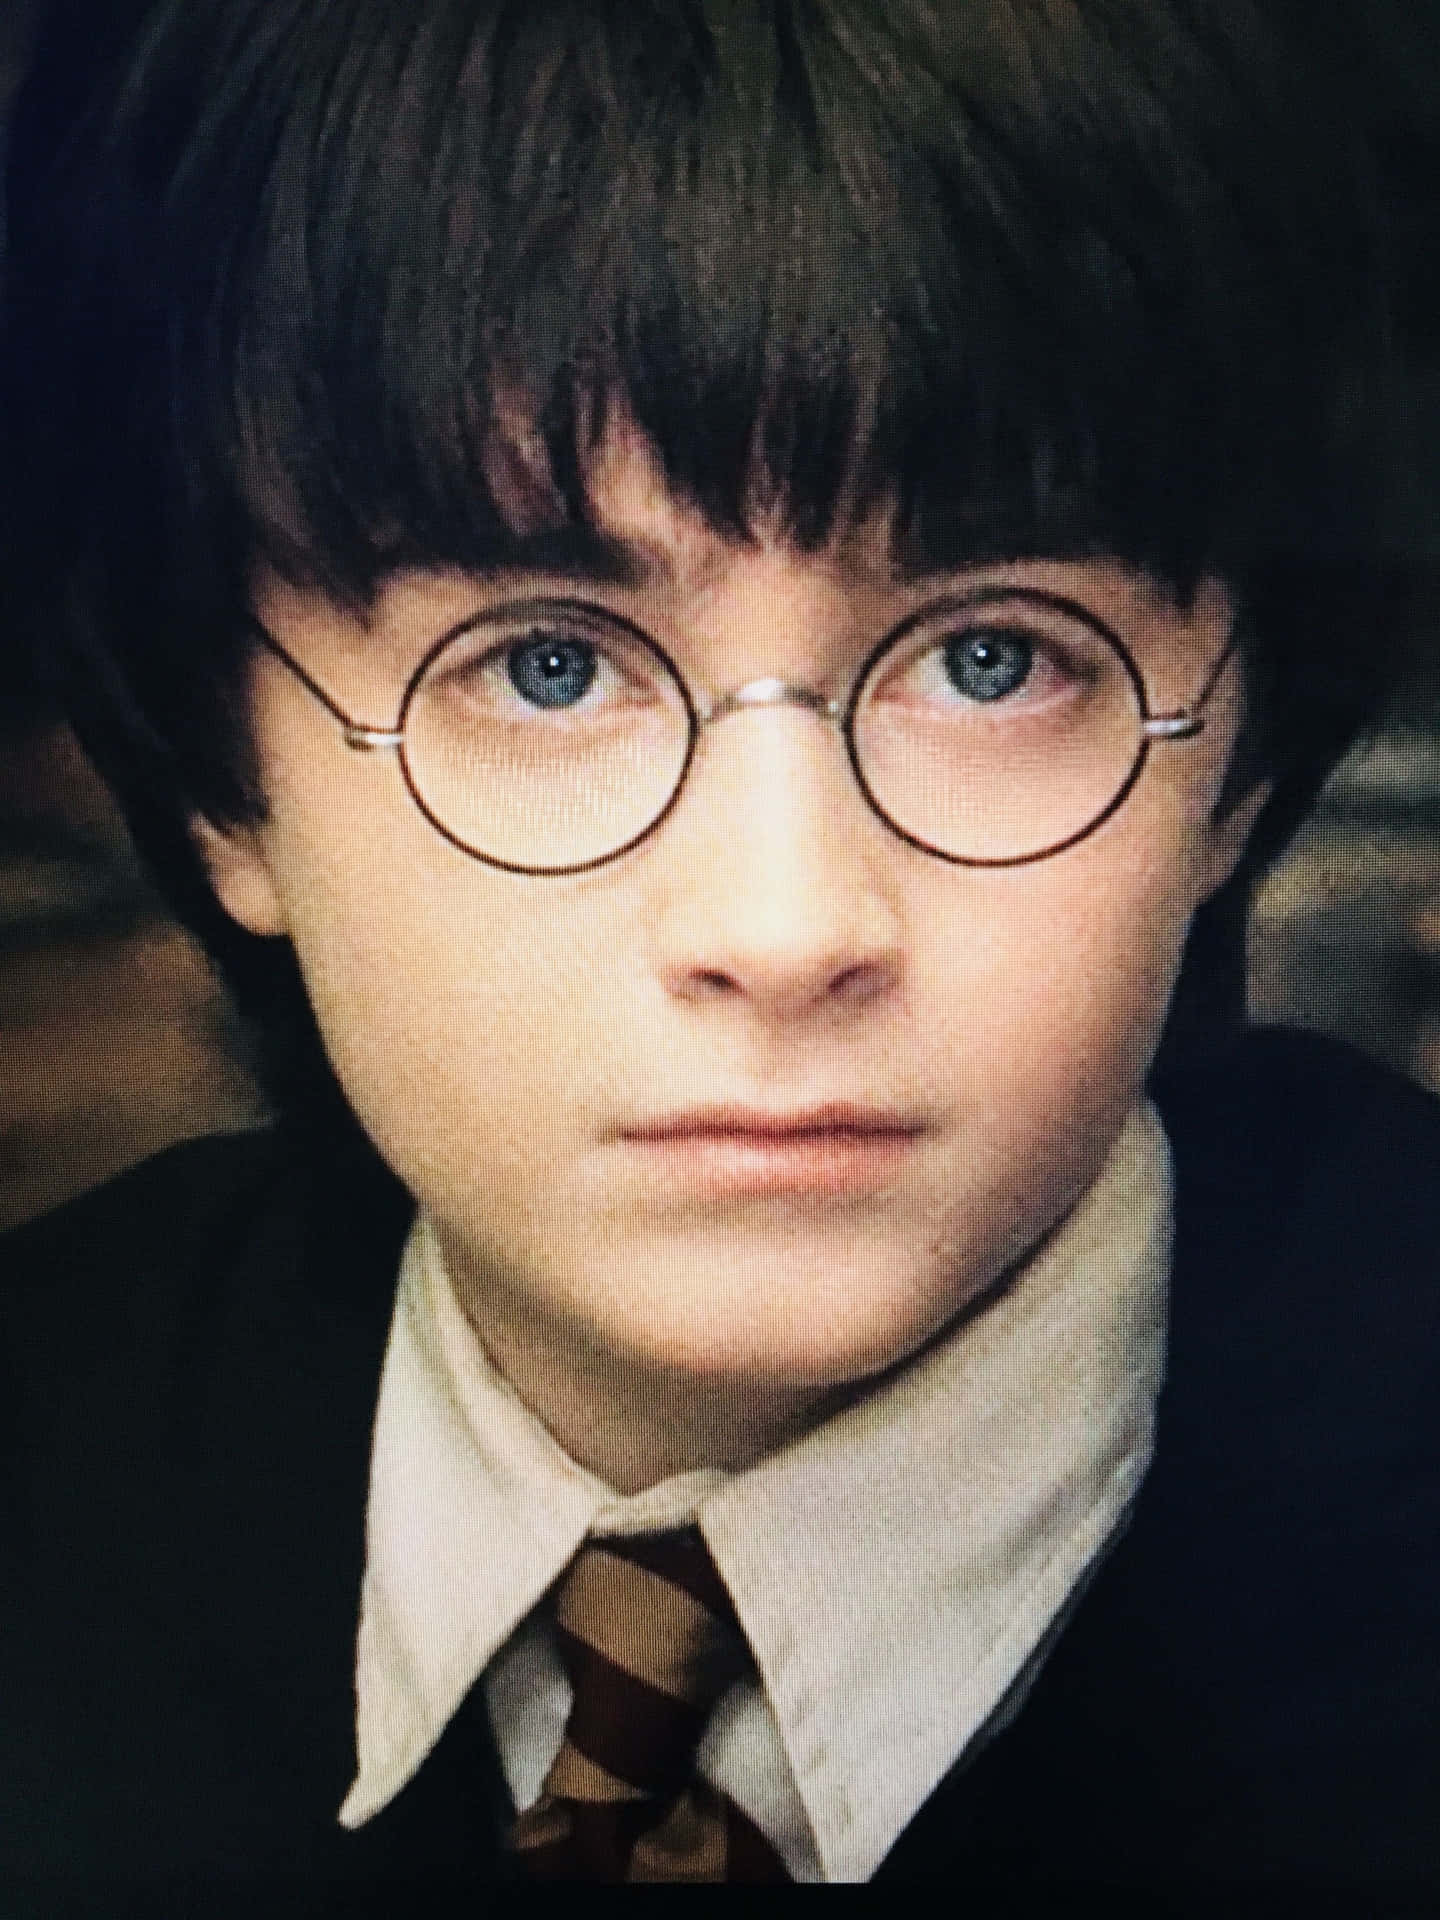 "A look into the face of a young Harry Potter."